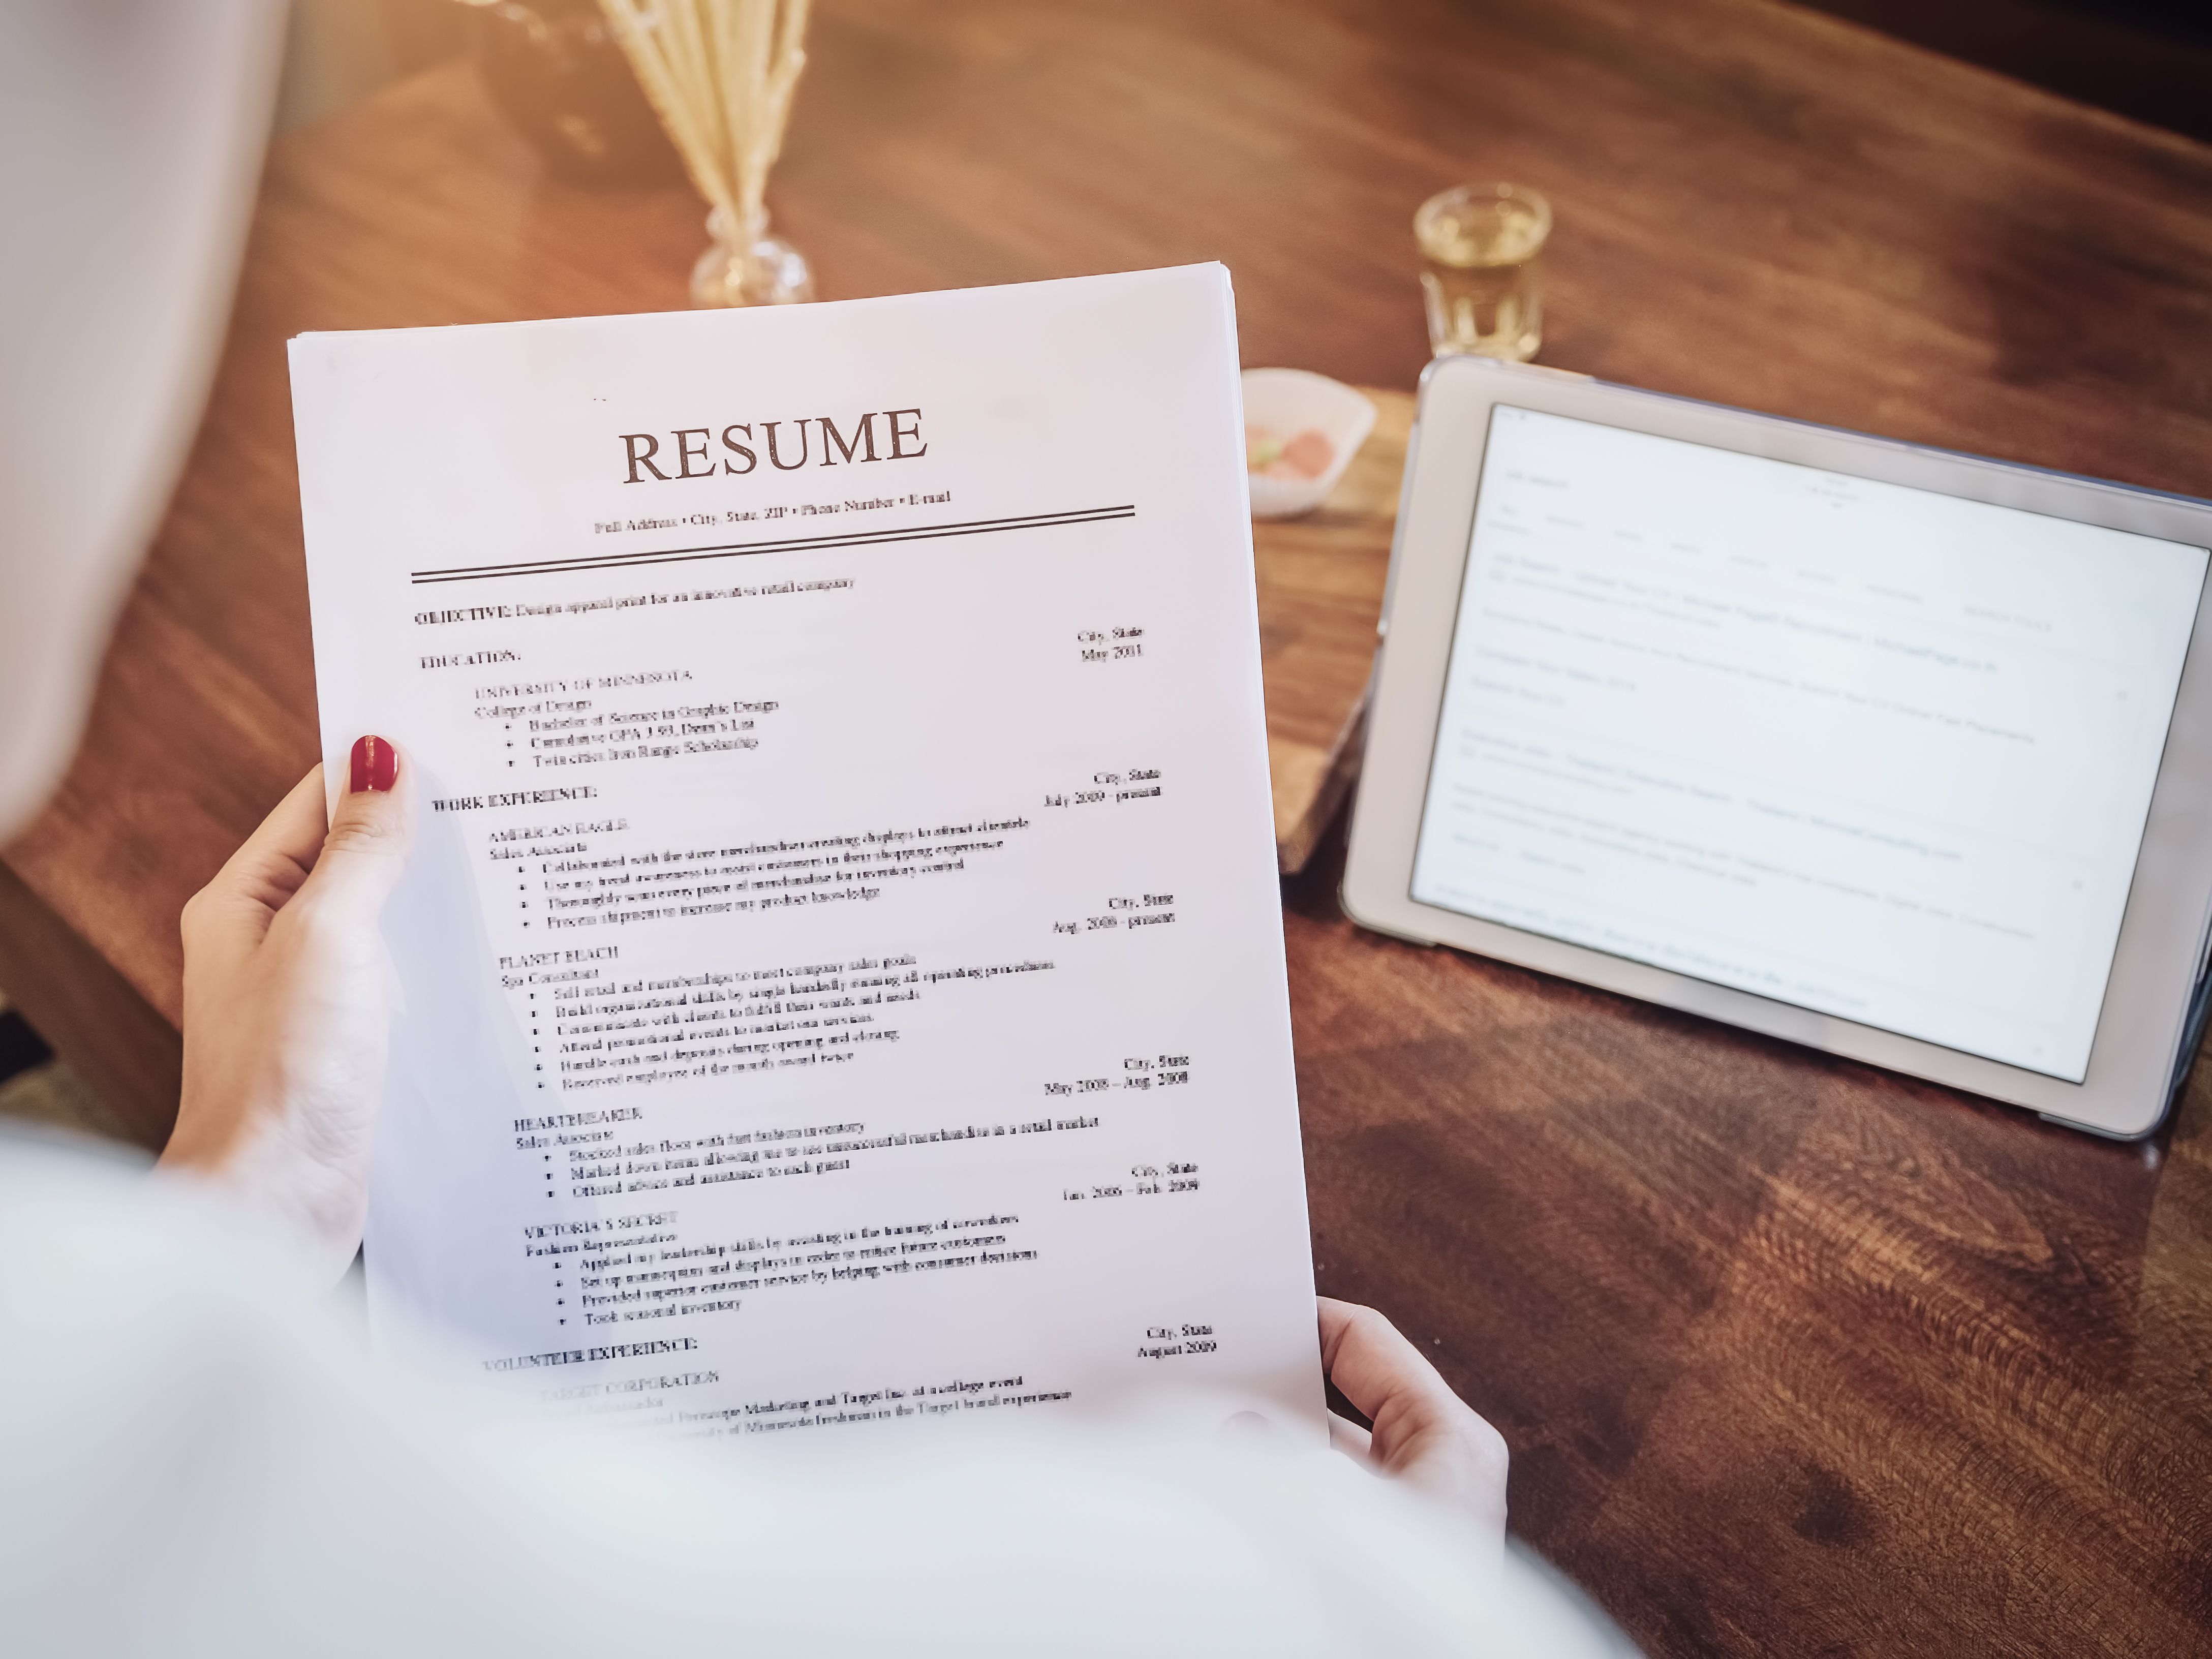 Benefits of Keywords in Your Resume